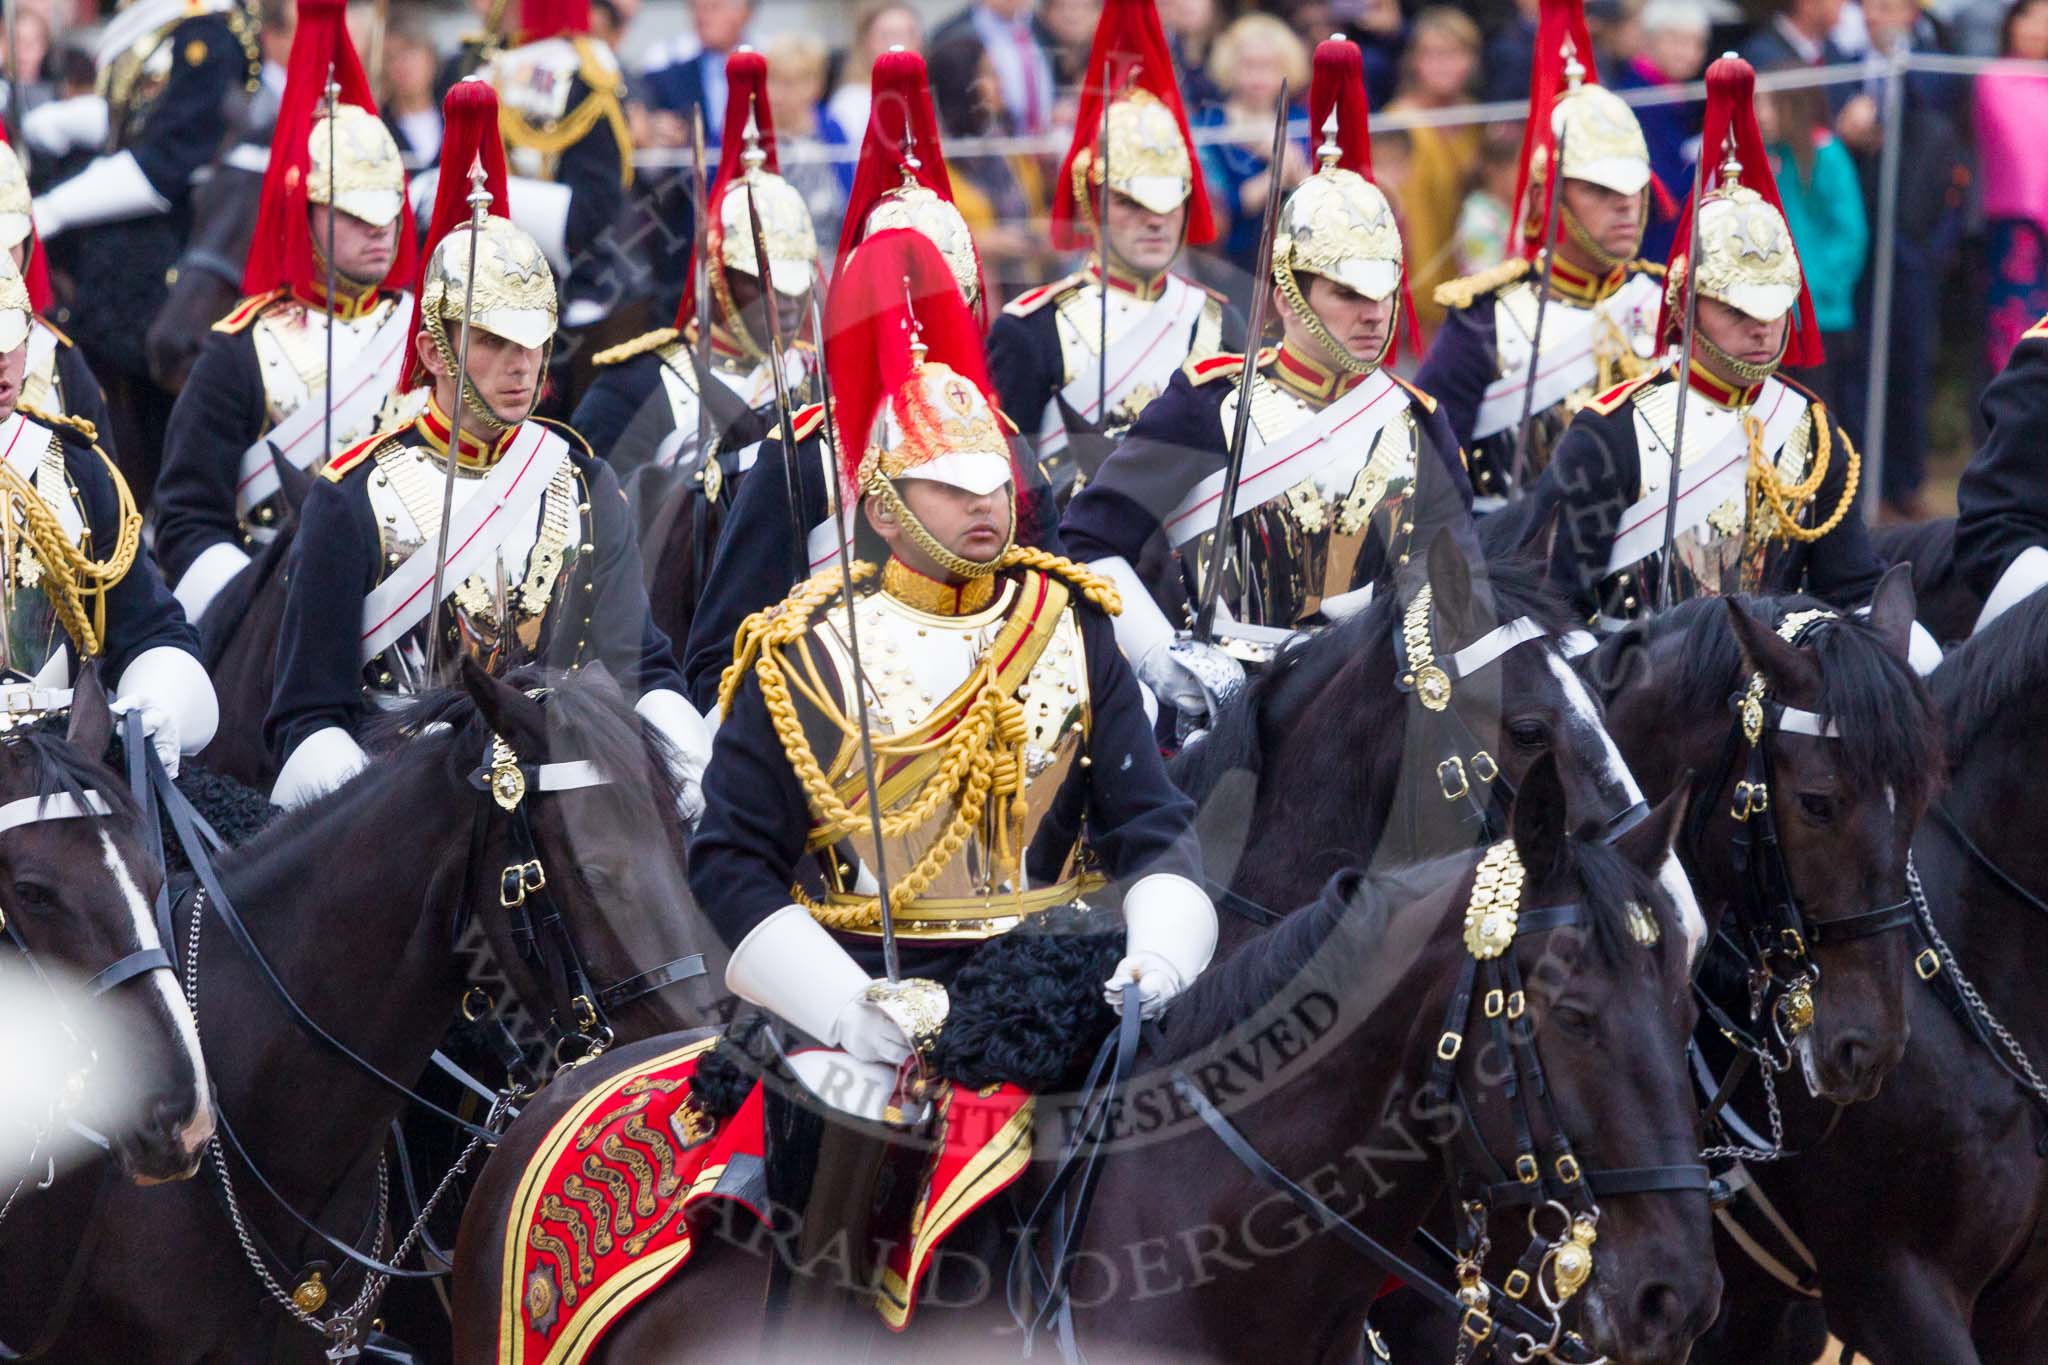 Trooping the Colour 2015. Image #563, 13 June 2015 11:54 Horse Guards Parade, London, UK